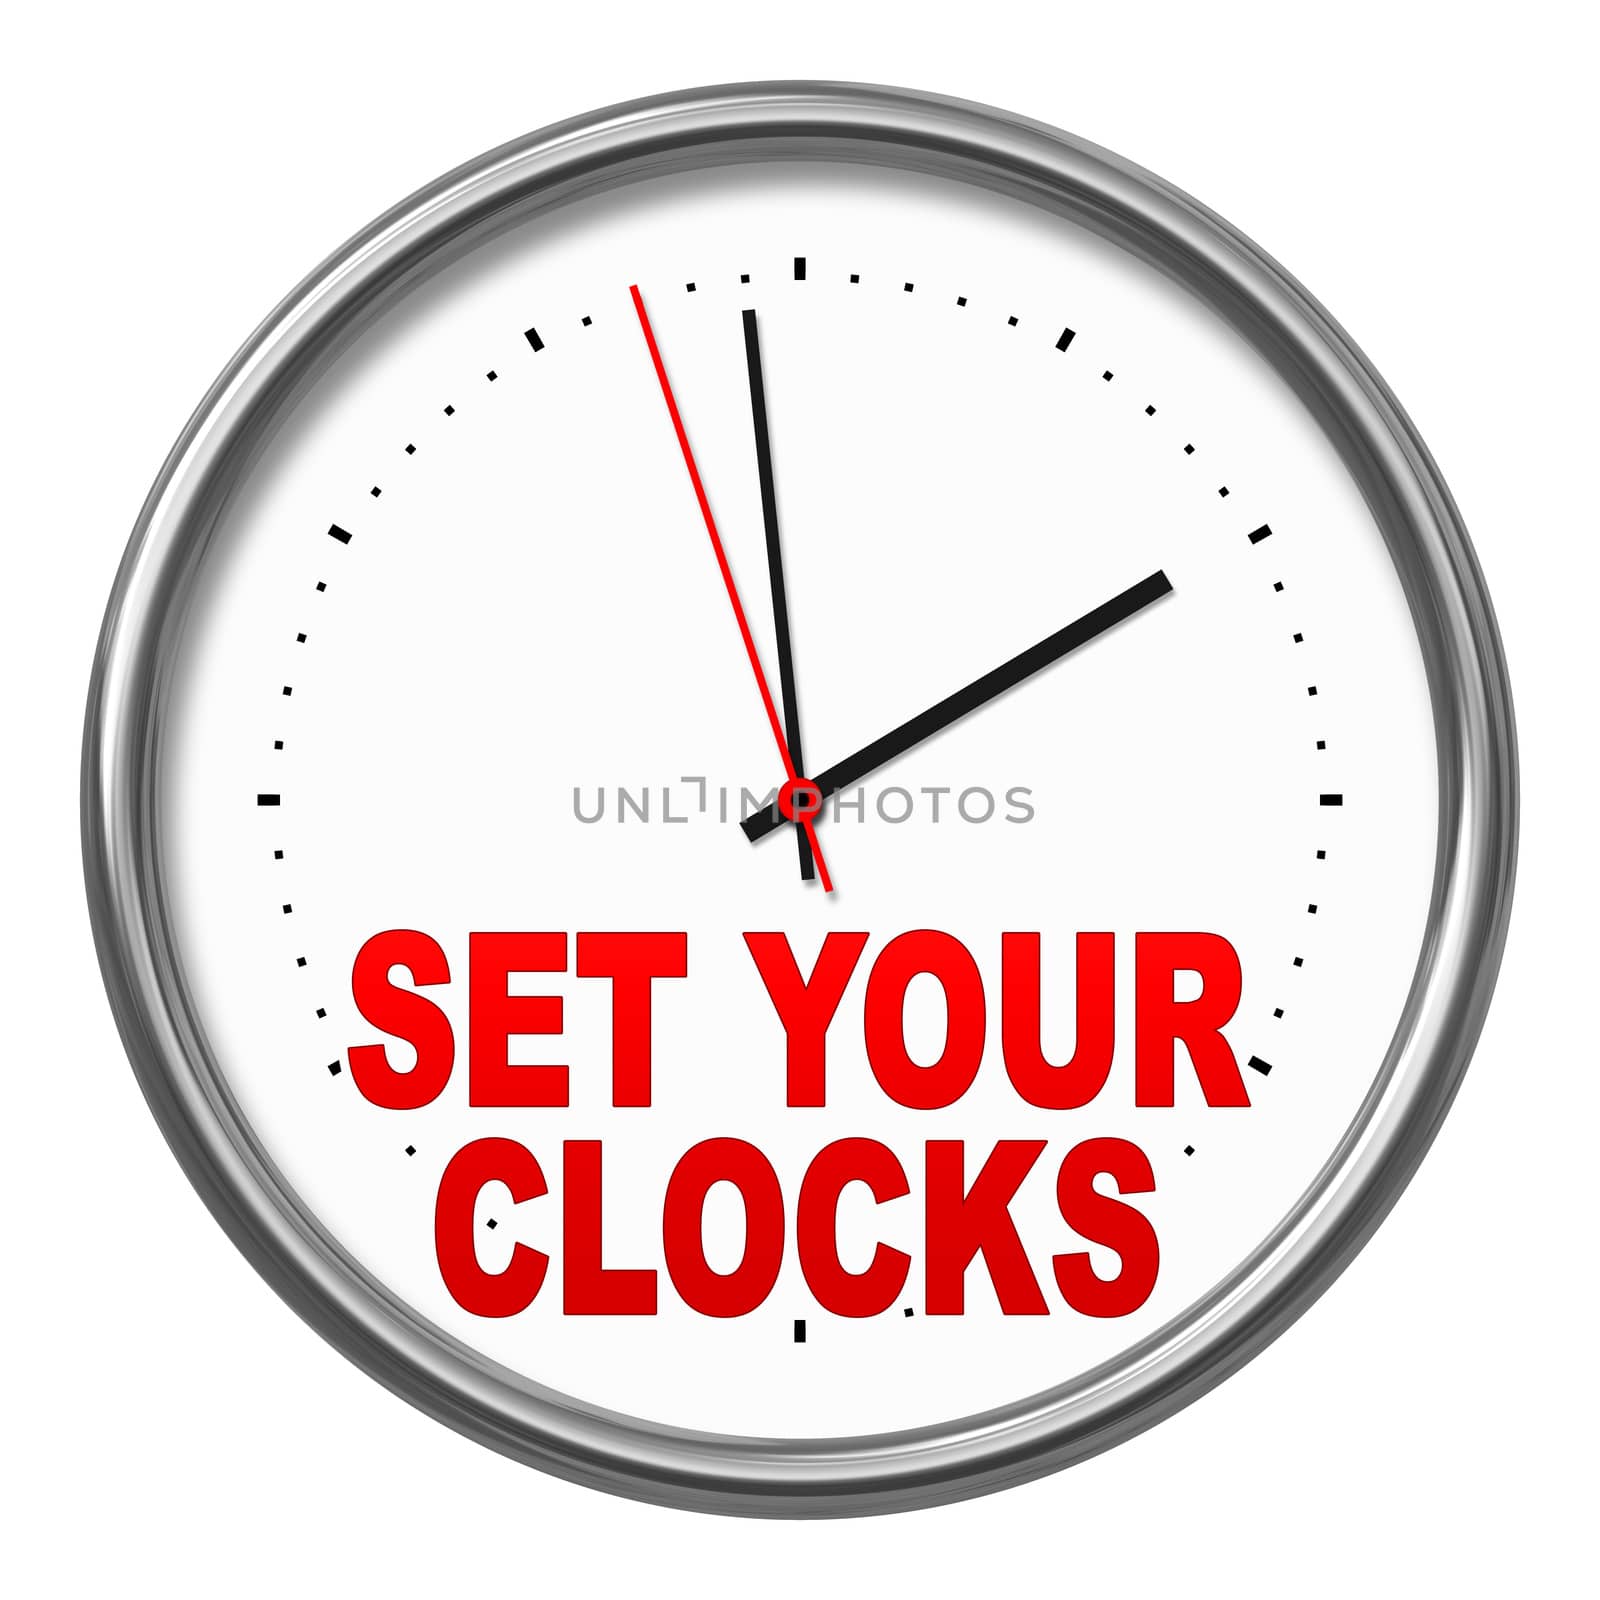 An image of a clock with the text "set your clocks"